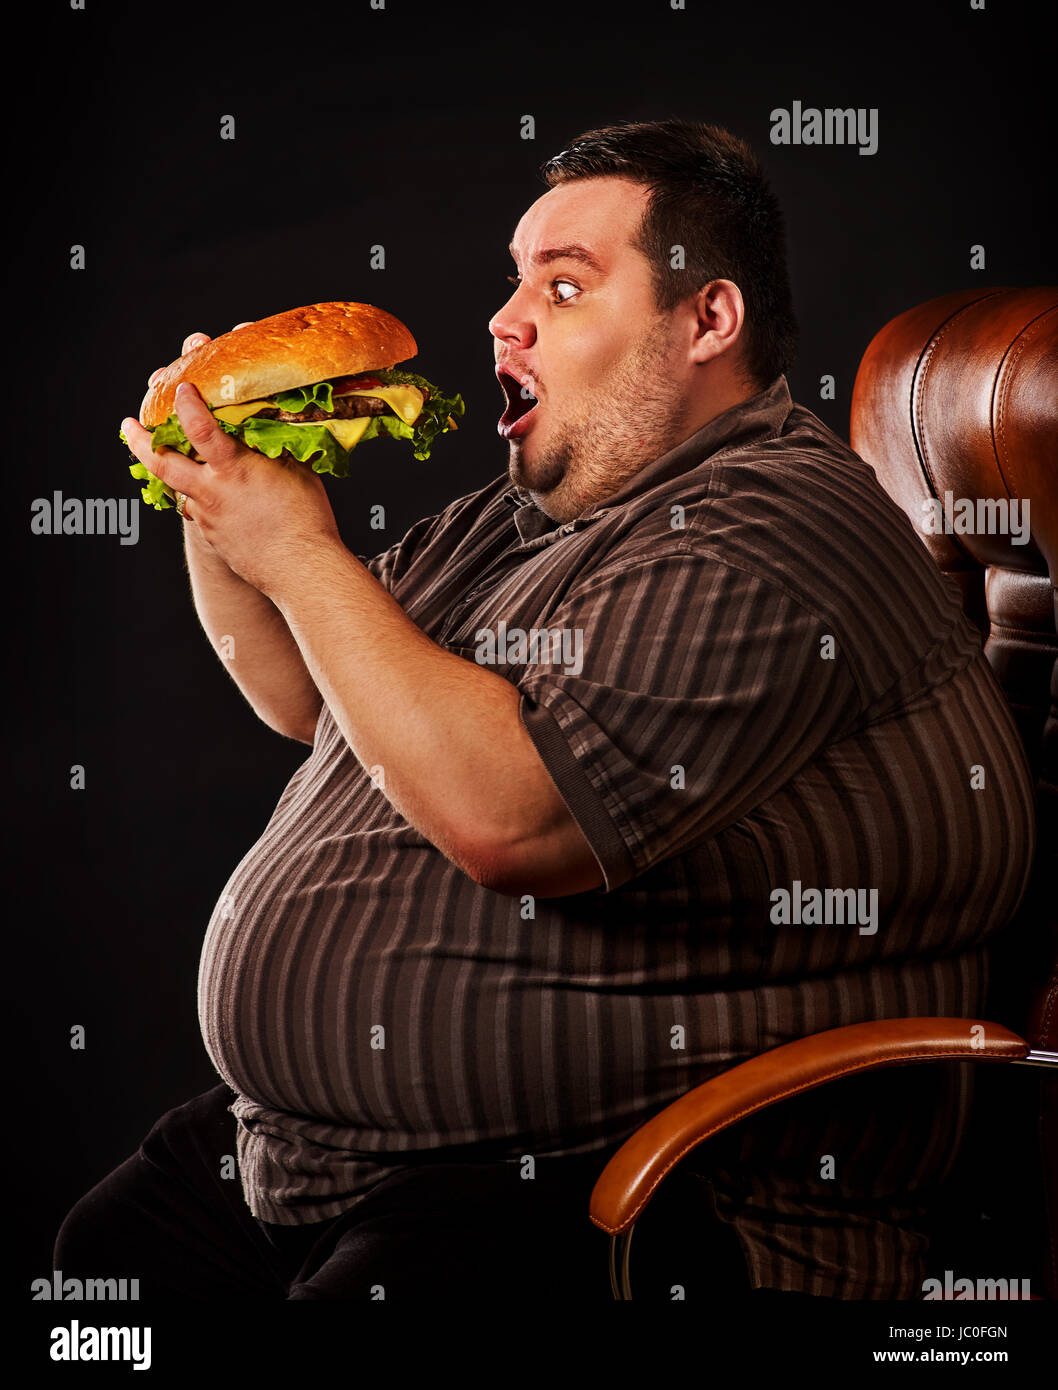 diet-failure-of-fat-man-eating-fast-food-hamberger-happy-overweight-JC0FGN.jpg